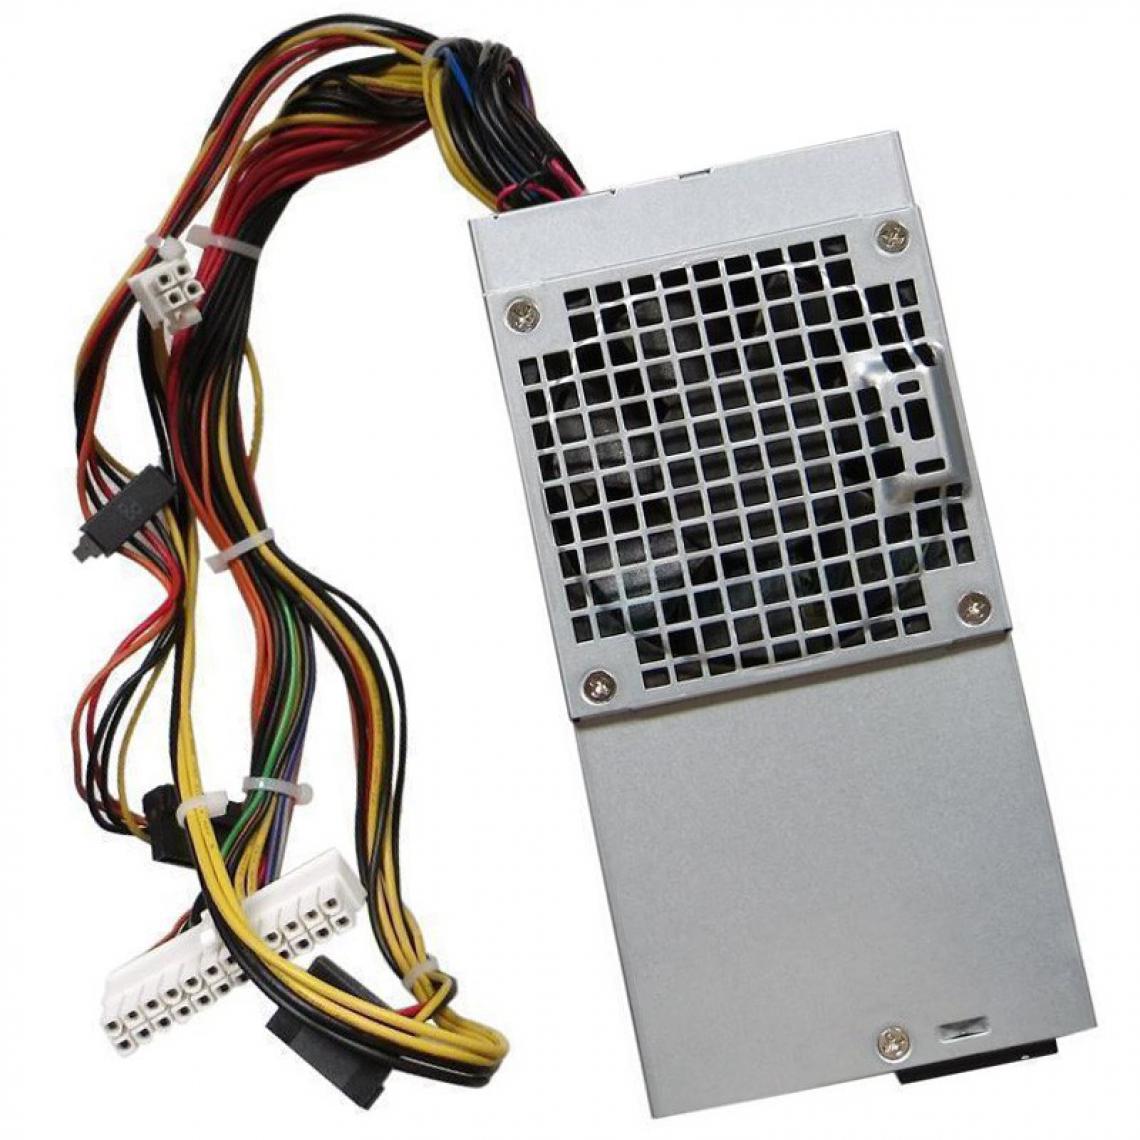 Dell - Alimentation PC DELL L250NS-00 0CYY97 CYY97 PS-5251-08D Inspiron 530 531 DT 250W - Alimentation modulaire